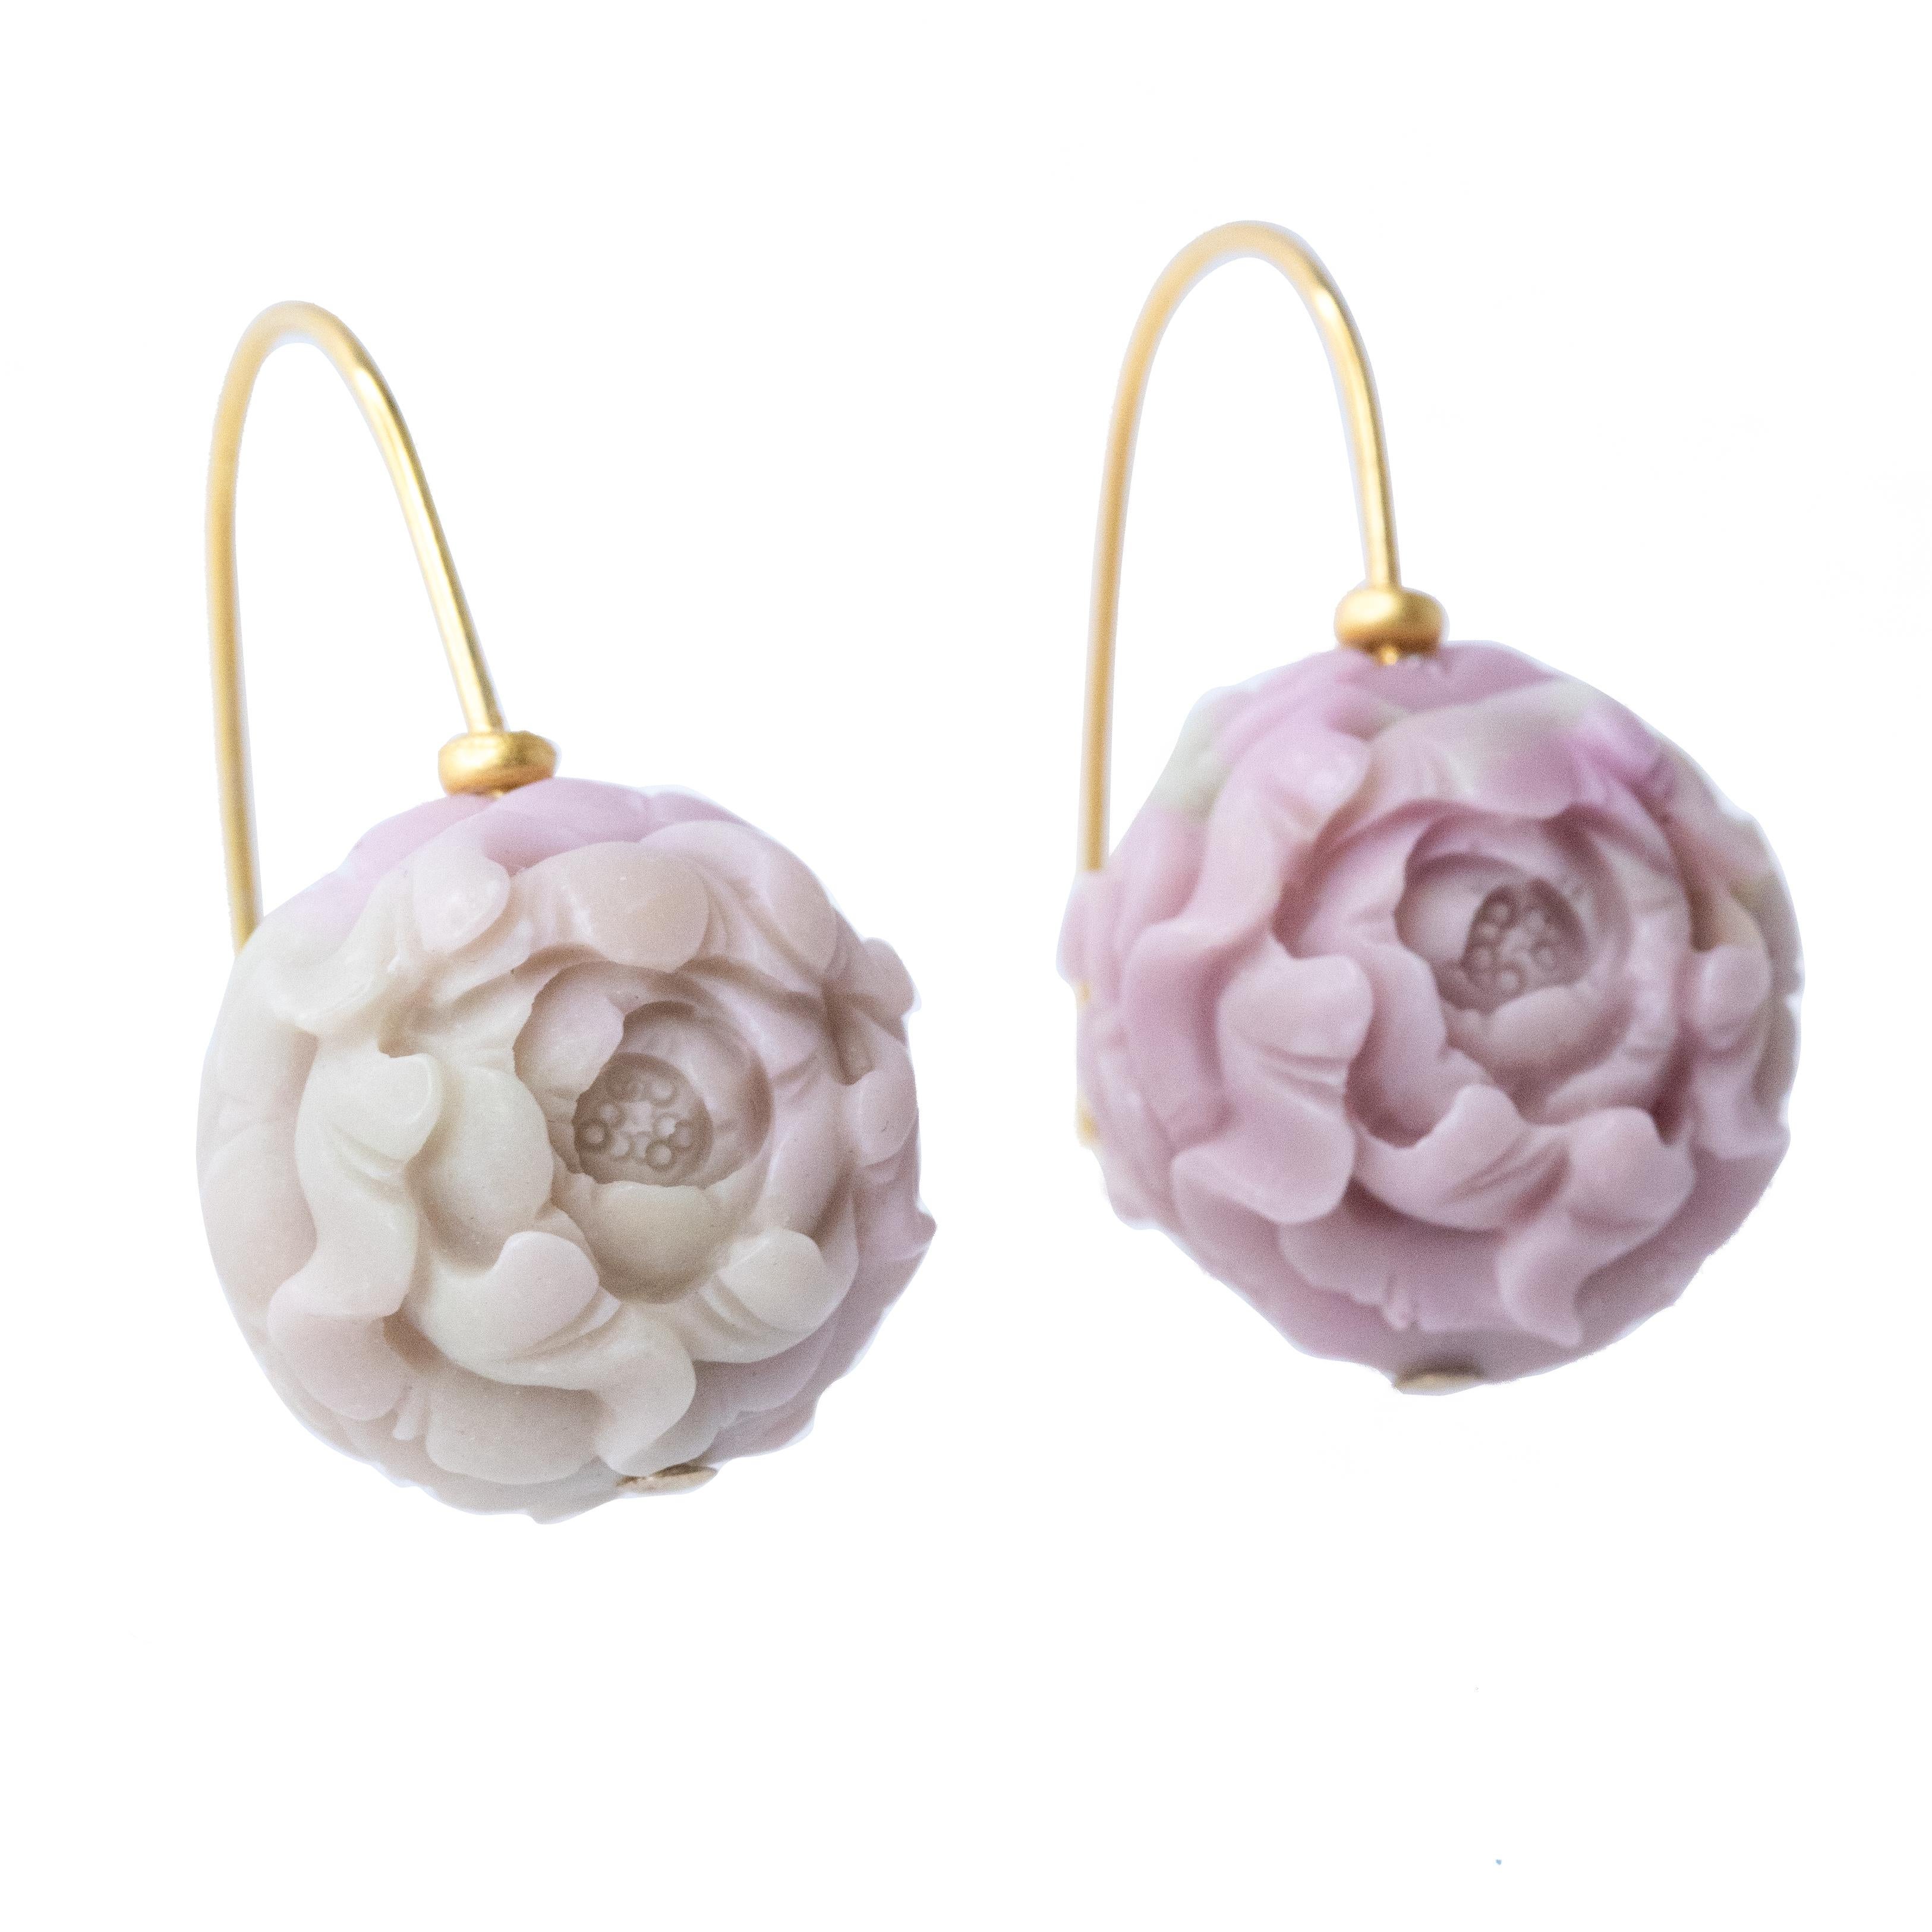 These earrings are crafted from rare Pink Carnelian Agate. Hand carved Peony Flower Bead by skilled artisans. Each bead is a unique masterpiece, imbued with intricate detail and craftsmanship that cannot be found anywhere else. Elevate your style